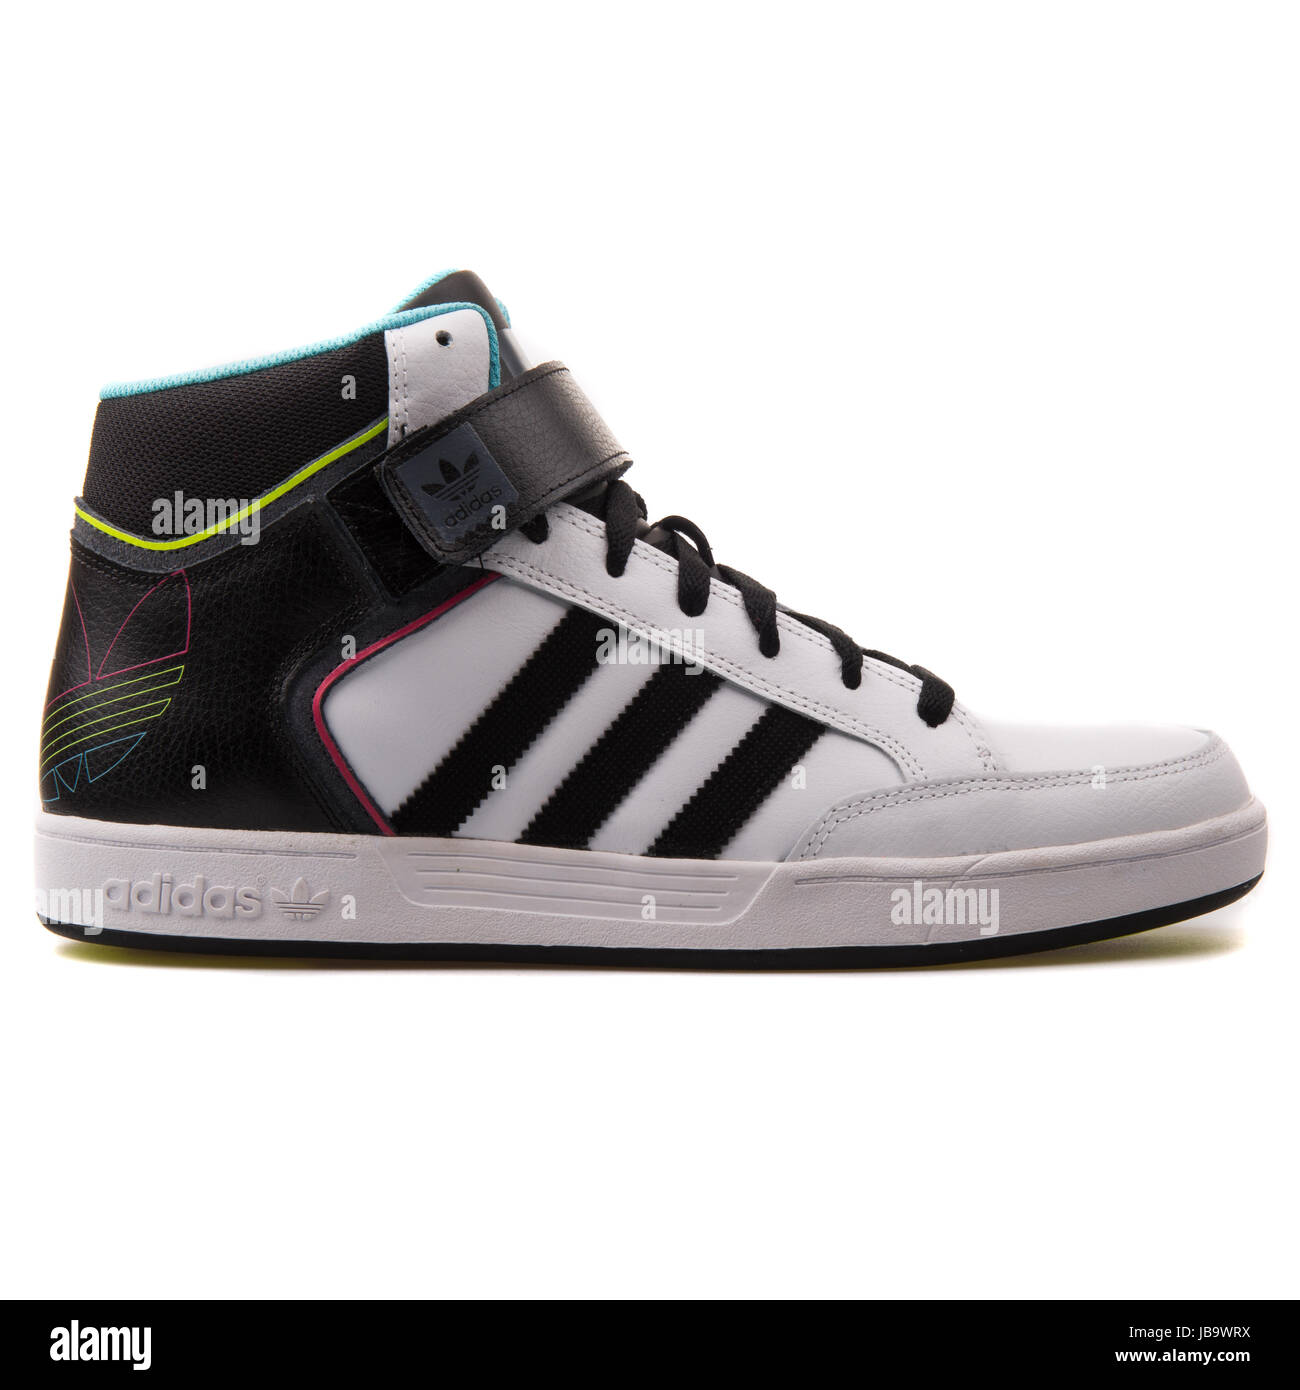 Adidas Varial Mid White and Black Men's Skateboarding Shoes - D68665 Stock  Photo - Alamy